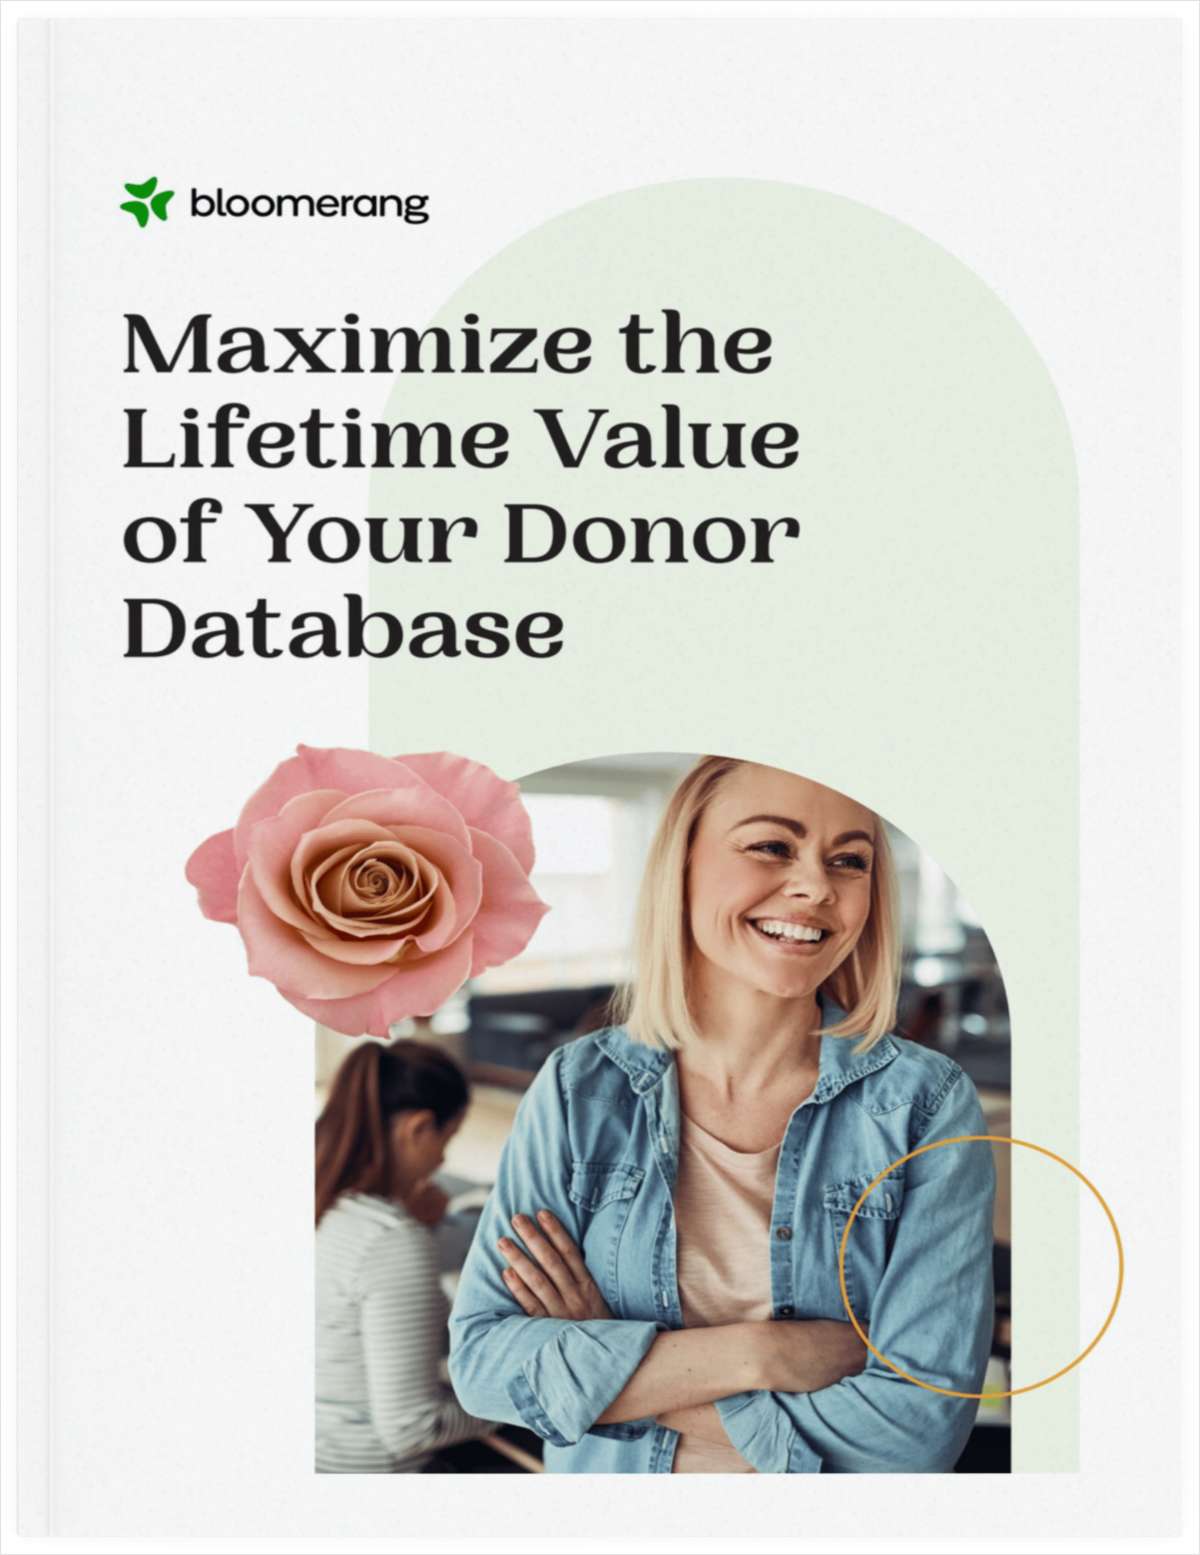 Maximize the Lifetime Value of your Donor Database